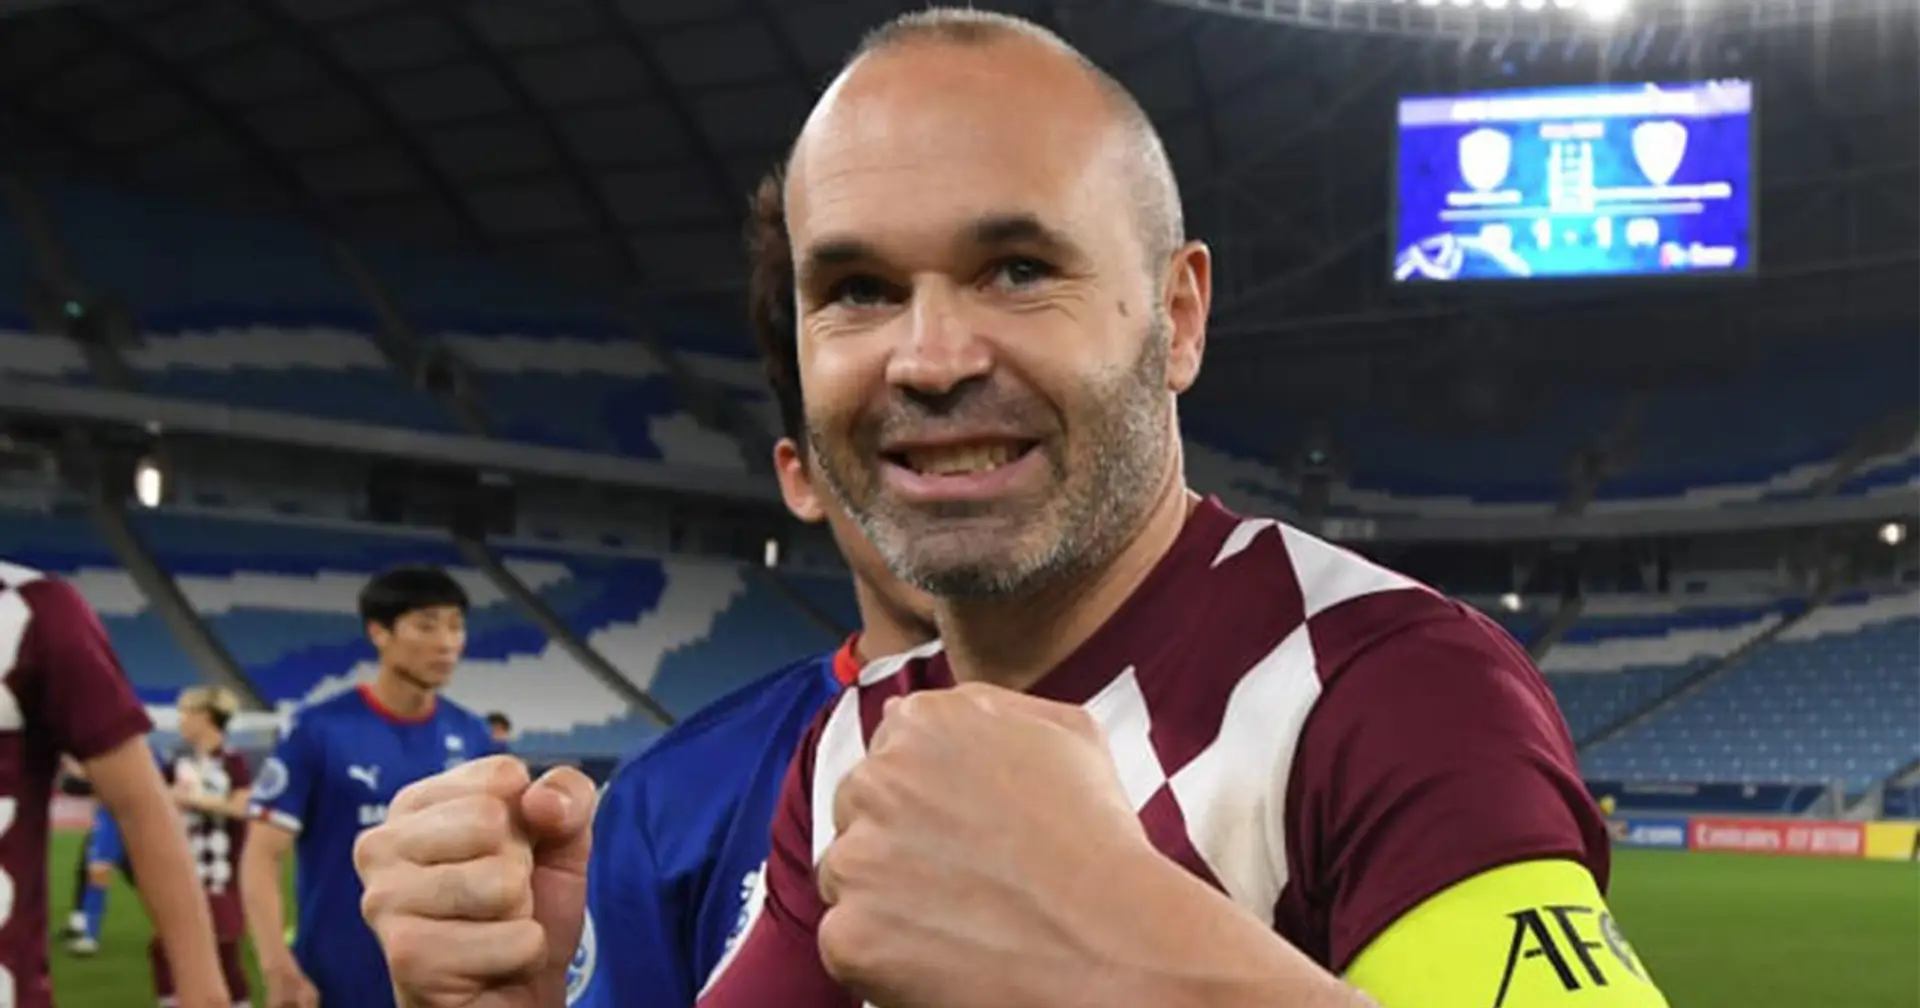 Andres Iniesta could soon win his 5th Champions League – this time in Asia